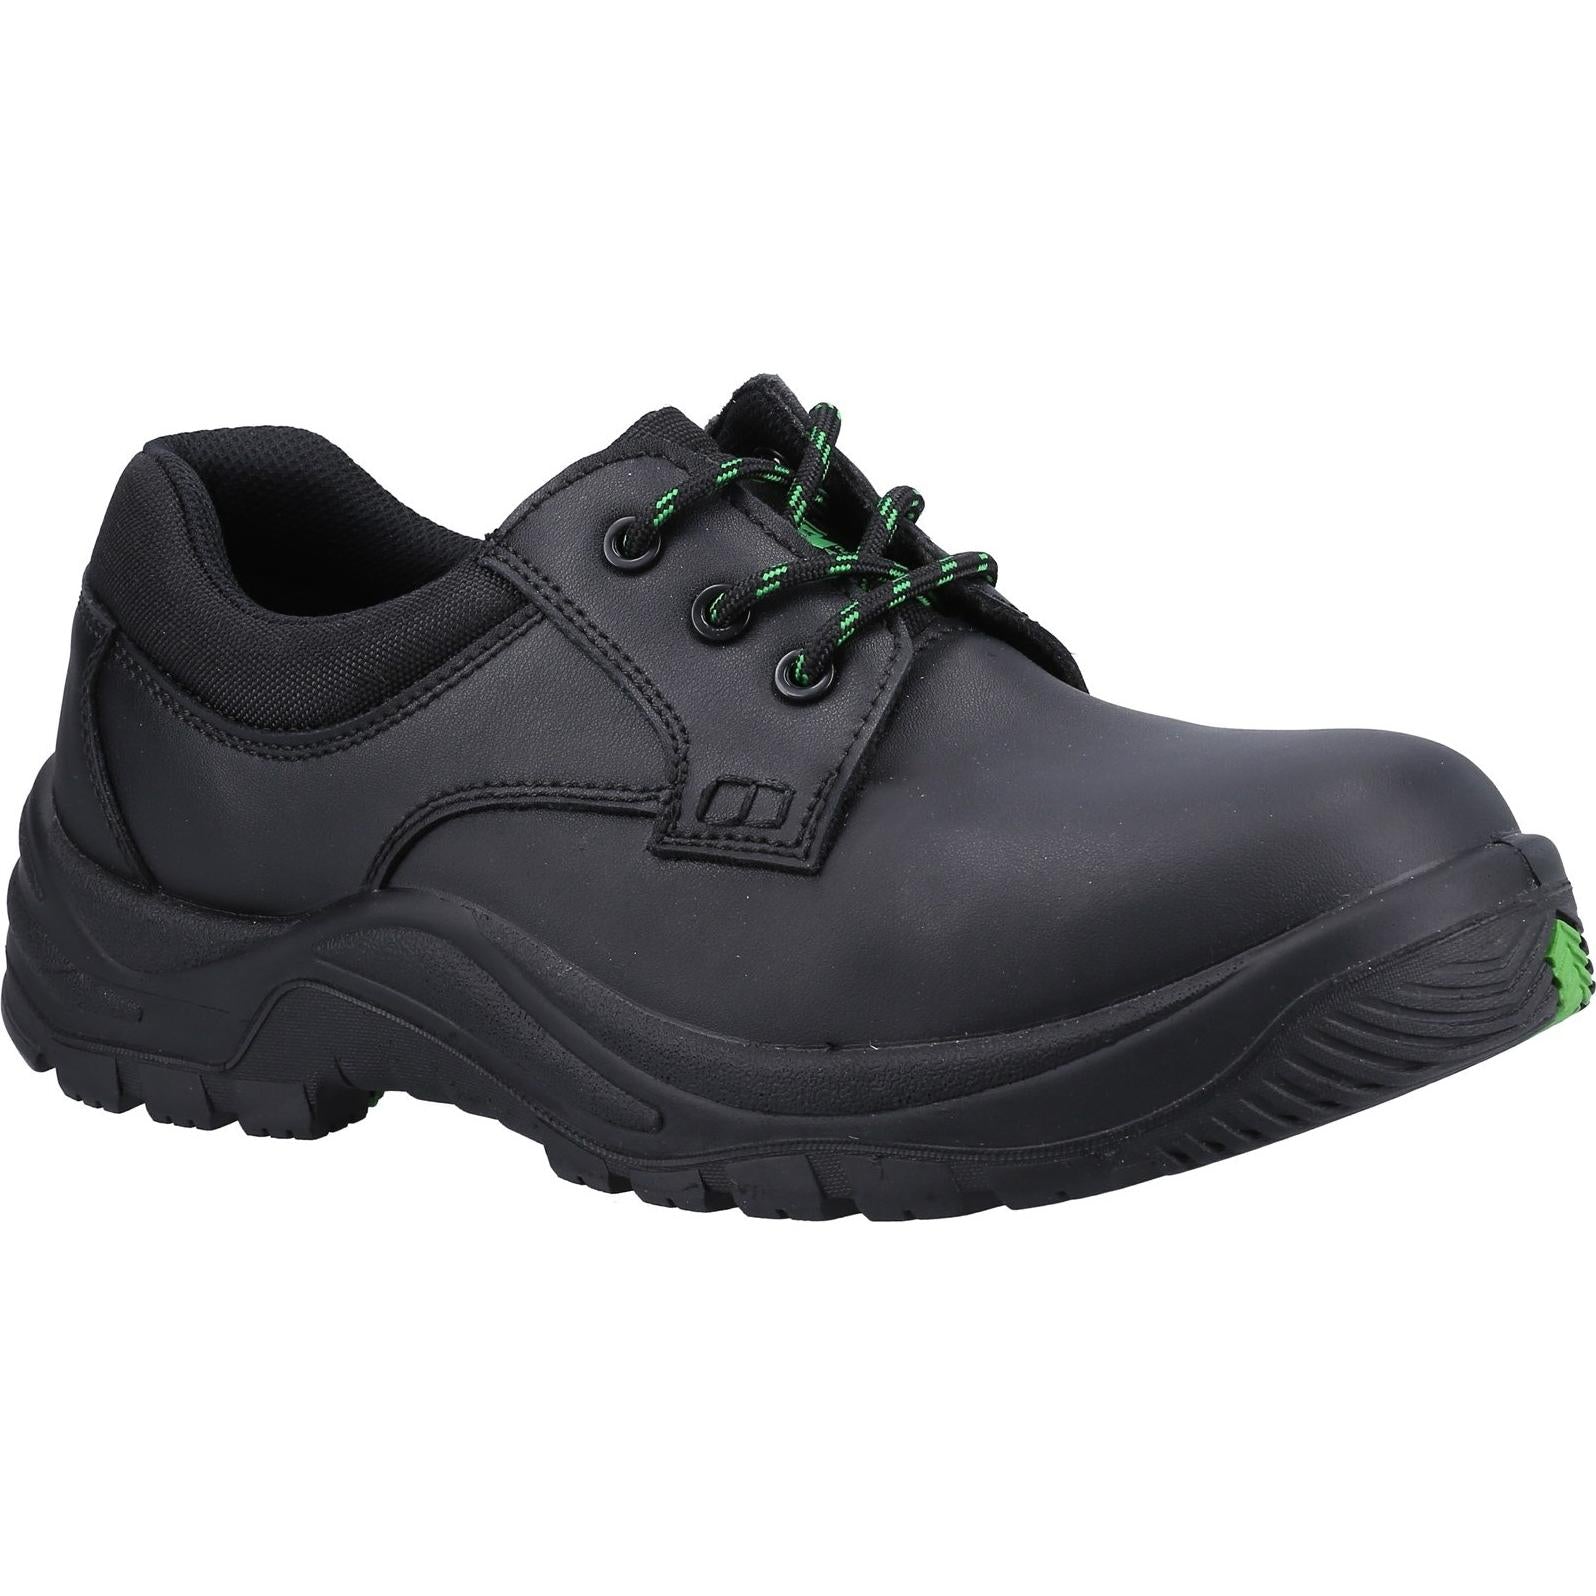 Amblers Safety 504 Shoes